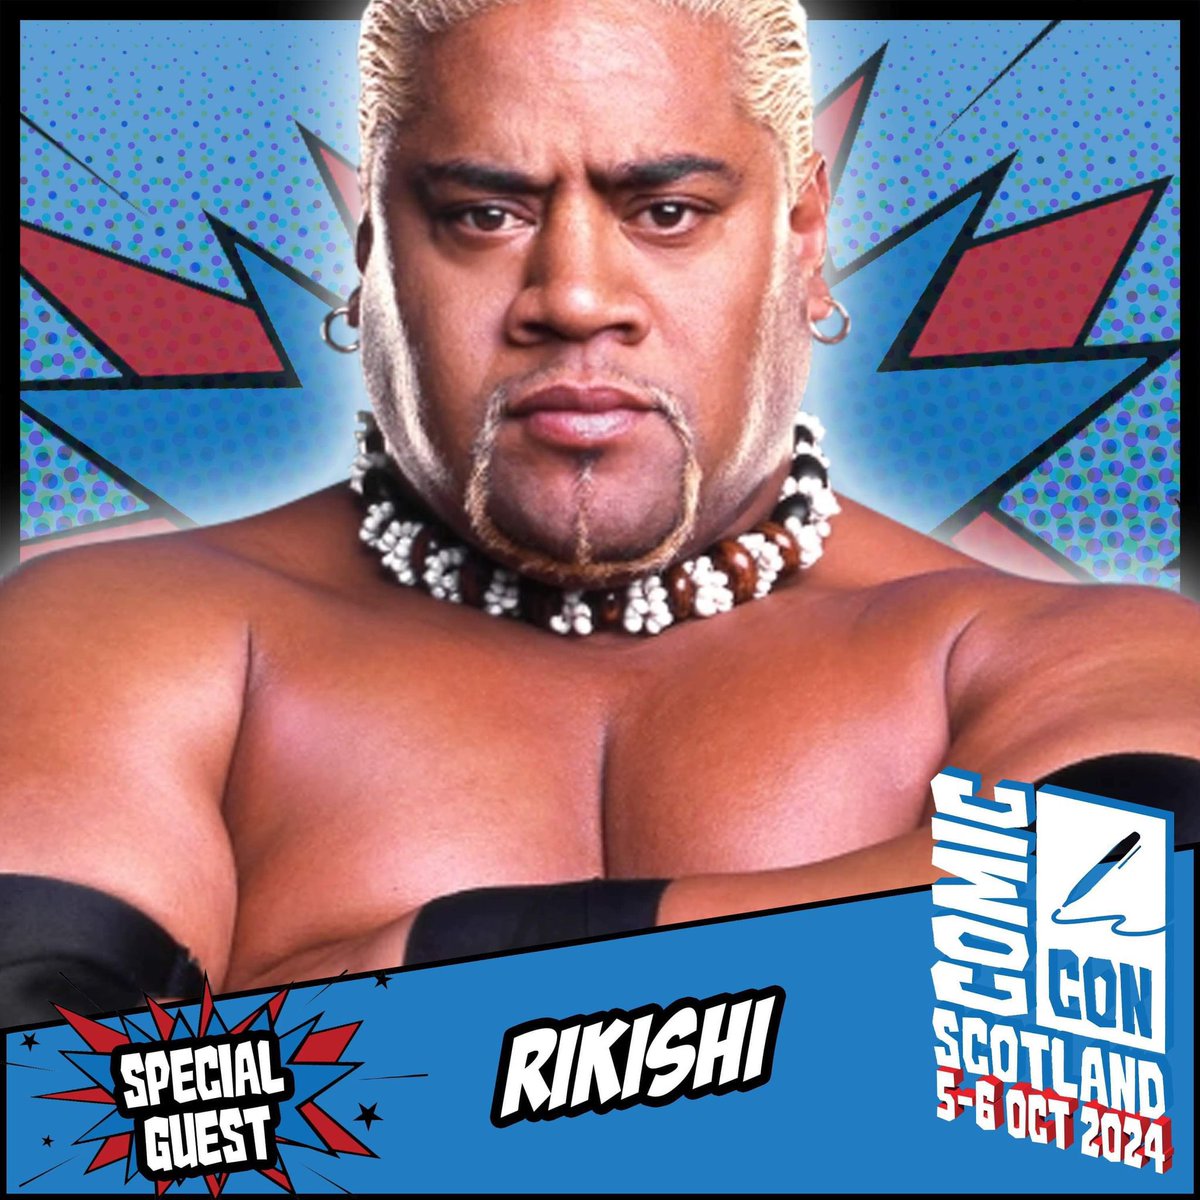 Comic Con Scotland welcomes Solofa Fatu Jr, best known under the ring names Rikishi and Fatu. He is a one-time Intercontinental Champion, two-time World Tag Team Champion, and one-time WWE Tag Team Champion. Appearing 5-6 October! Tickets: comicconventionscotland.co.uk